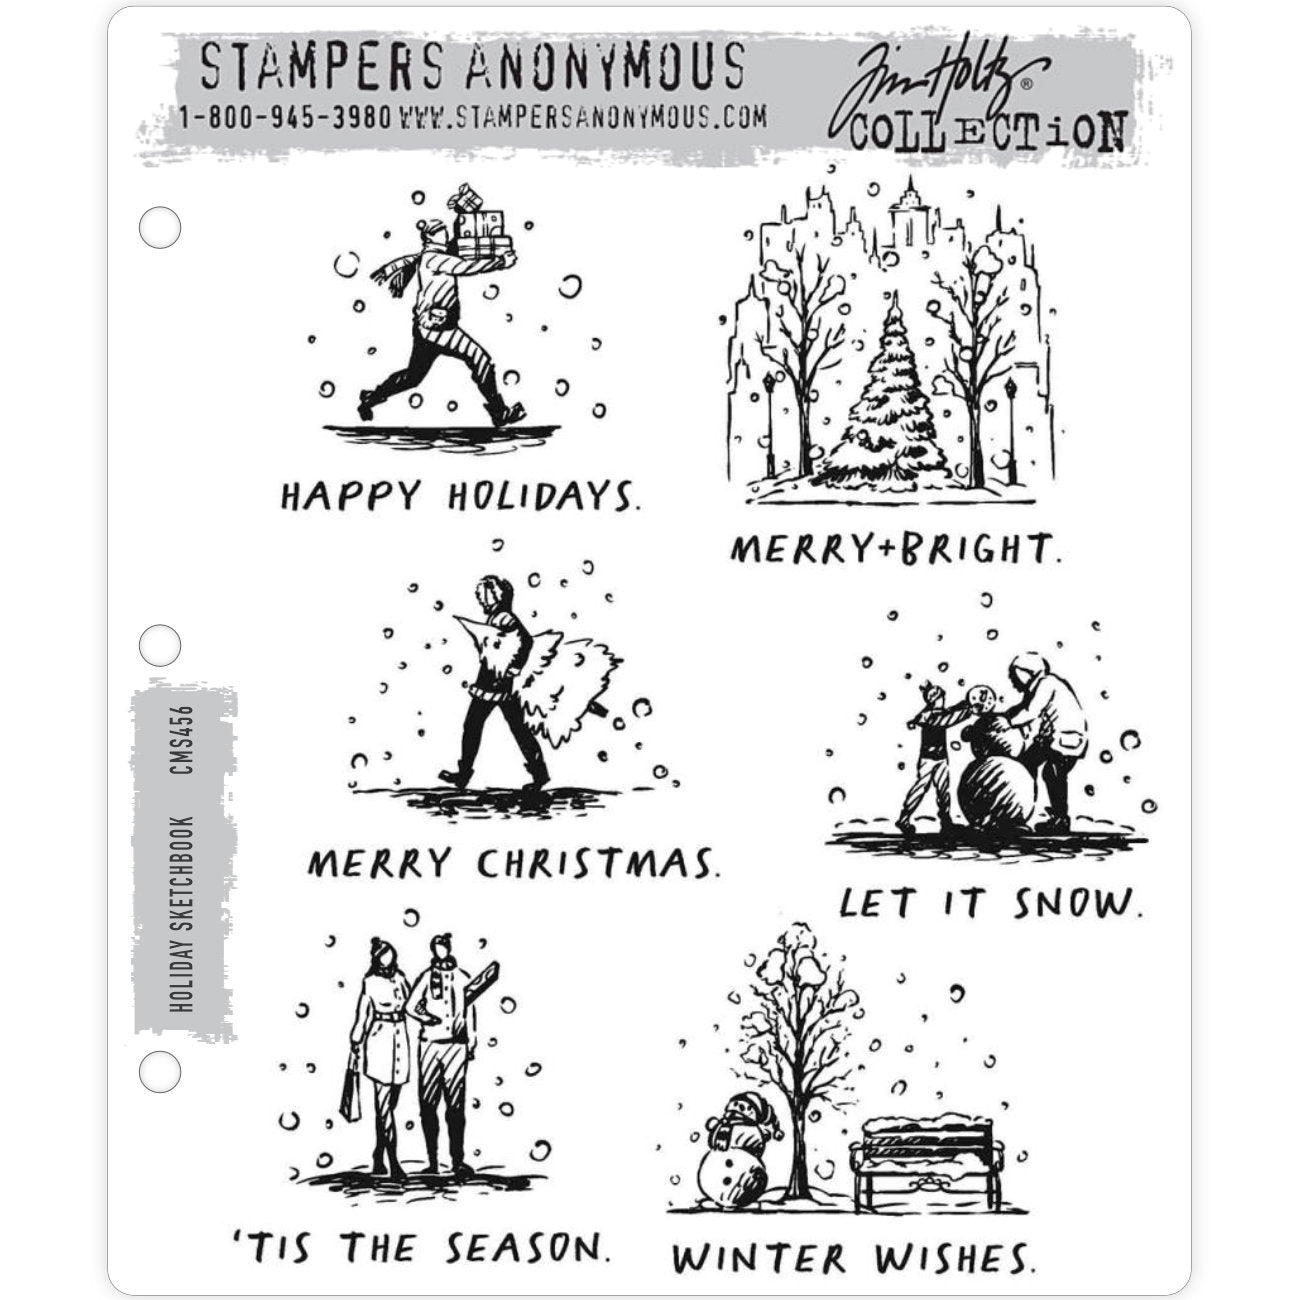 Holiday Sketchbook ... by Tim Holtz, made by Stampers Anonymous (CMS456). Set of 12 (twelve) cling mounted red rubber stamps.  A set of beautiful vintage hand drawn engravings of scenes and messages, perfect for Christmas cards, tags, journaling, scrapbooking, memory keeping, planners and other festive projects.